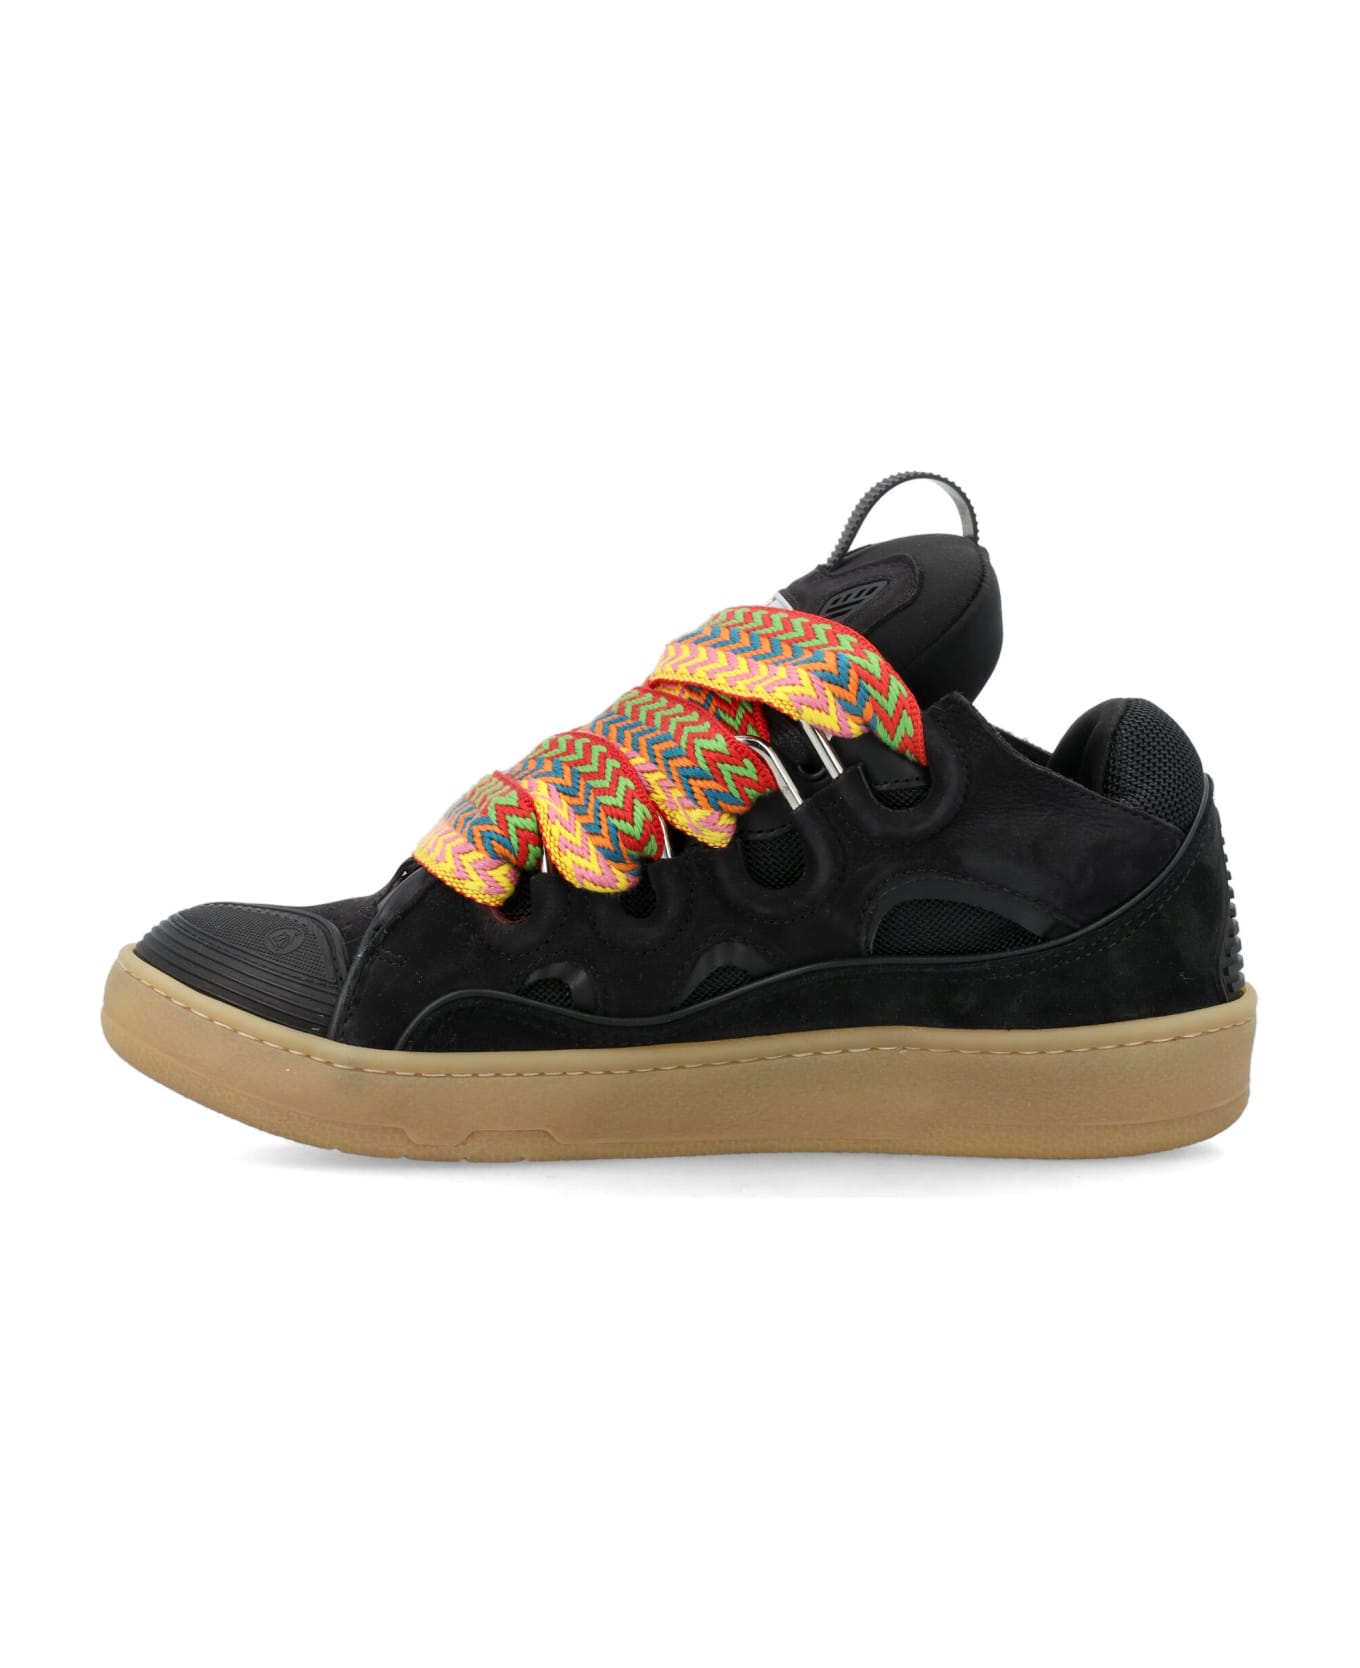 Lanvin Leather Curb Sneakers - BLACK